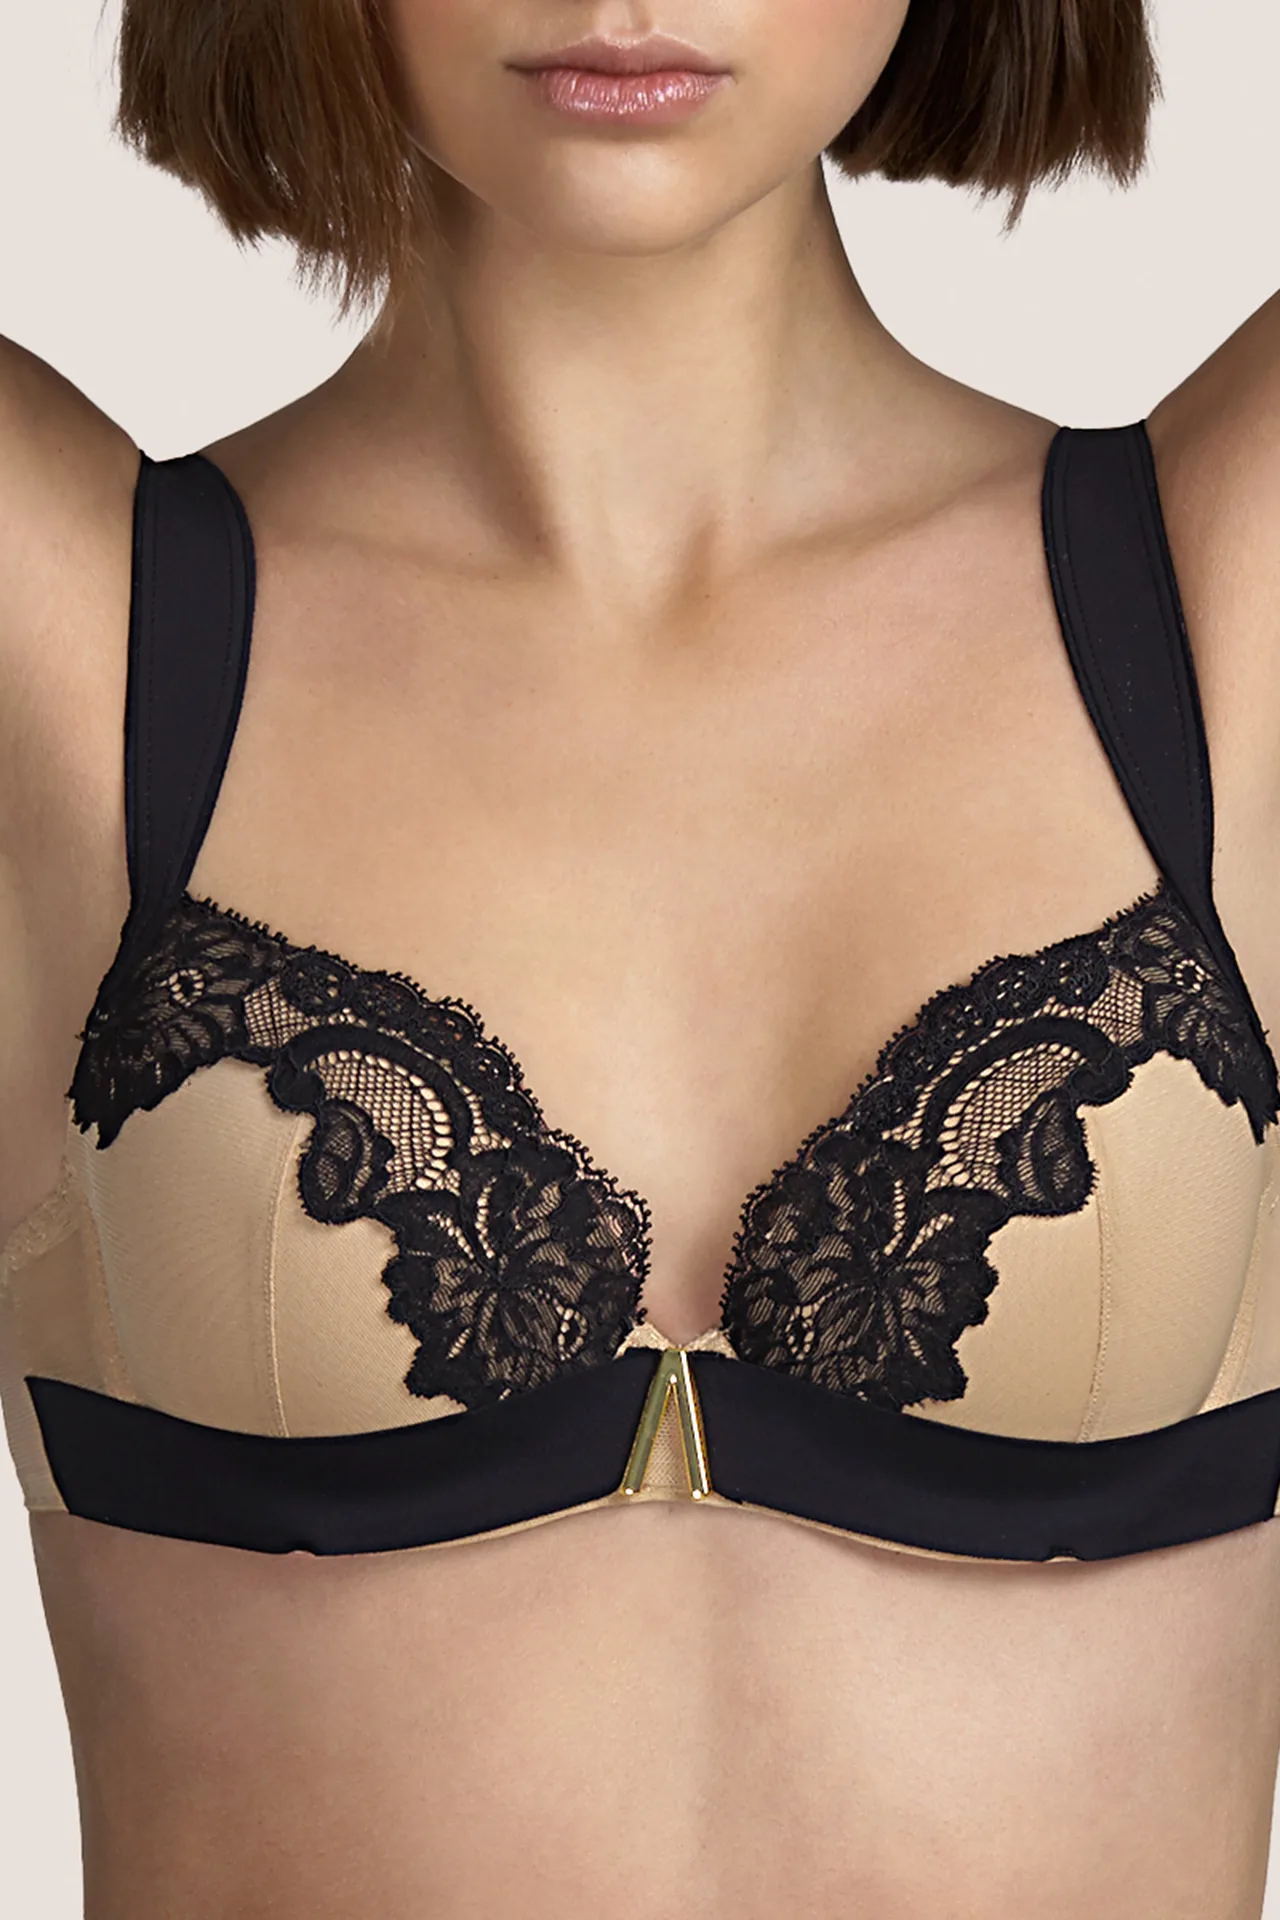 Underwired bra without padding natural lace andres sarda